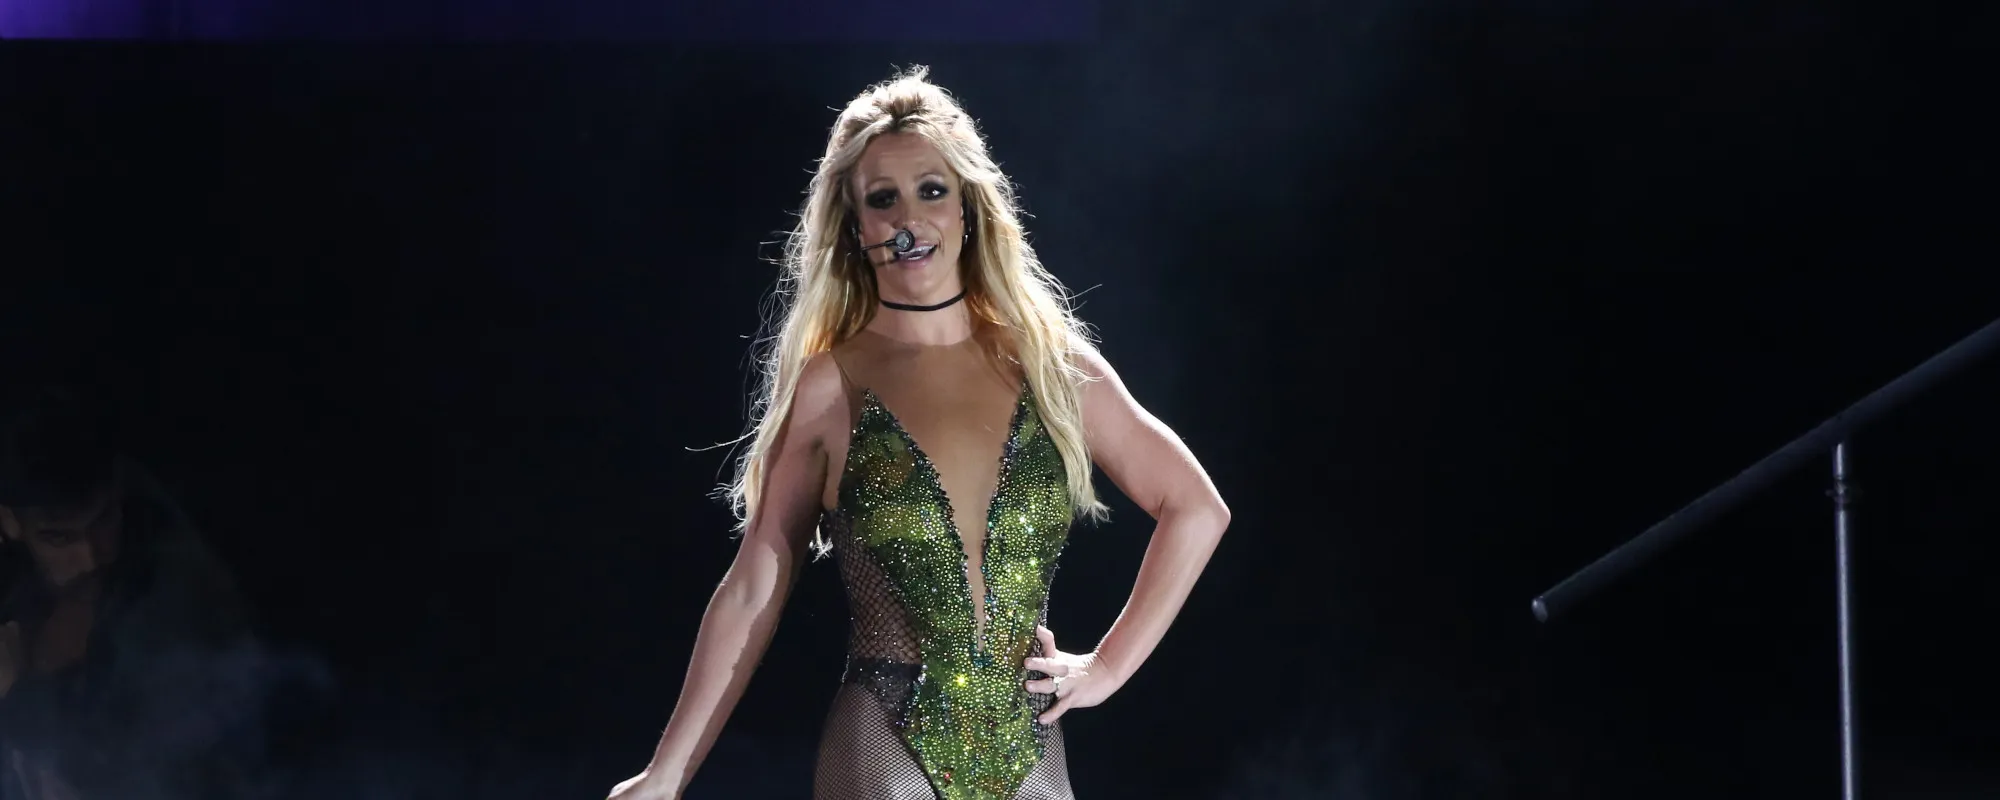 Ranking All of Britney Spears’ No. 1 Hits